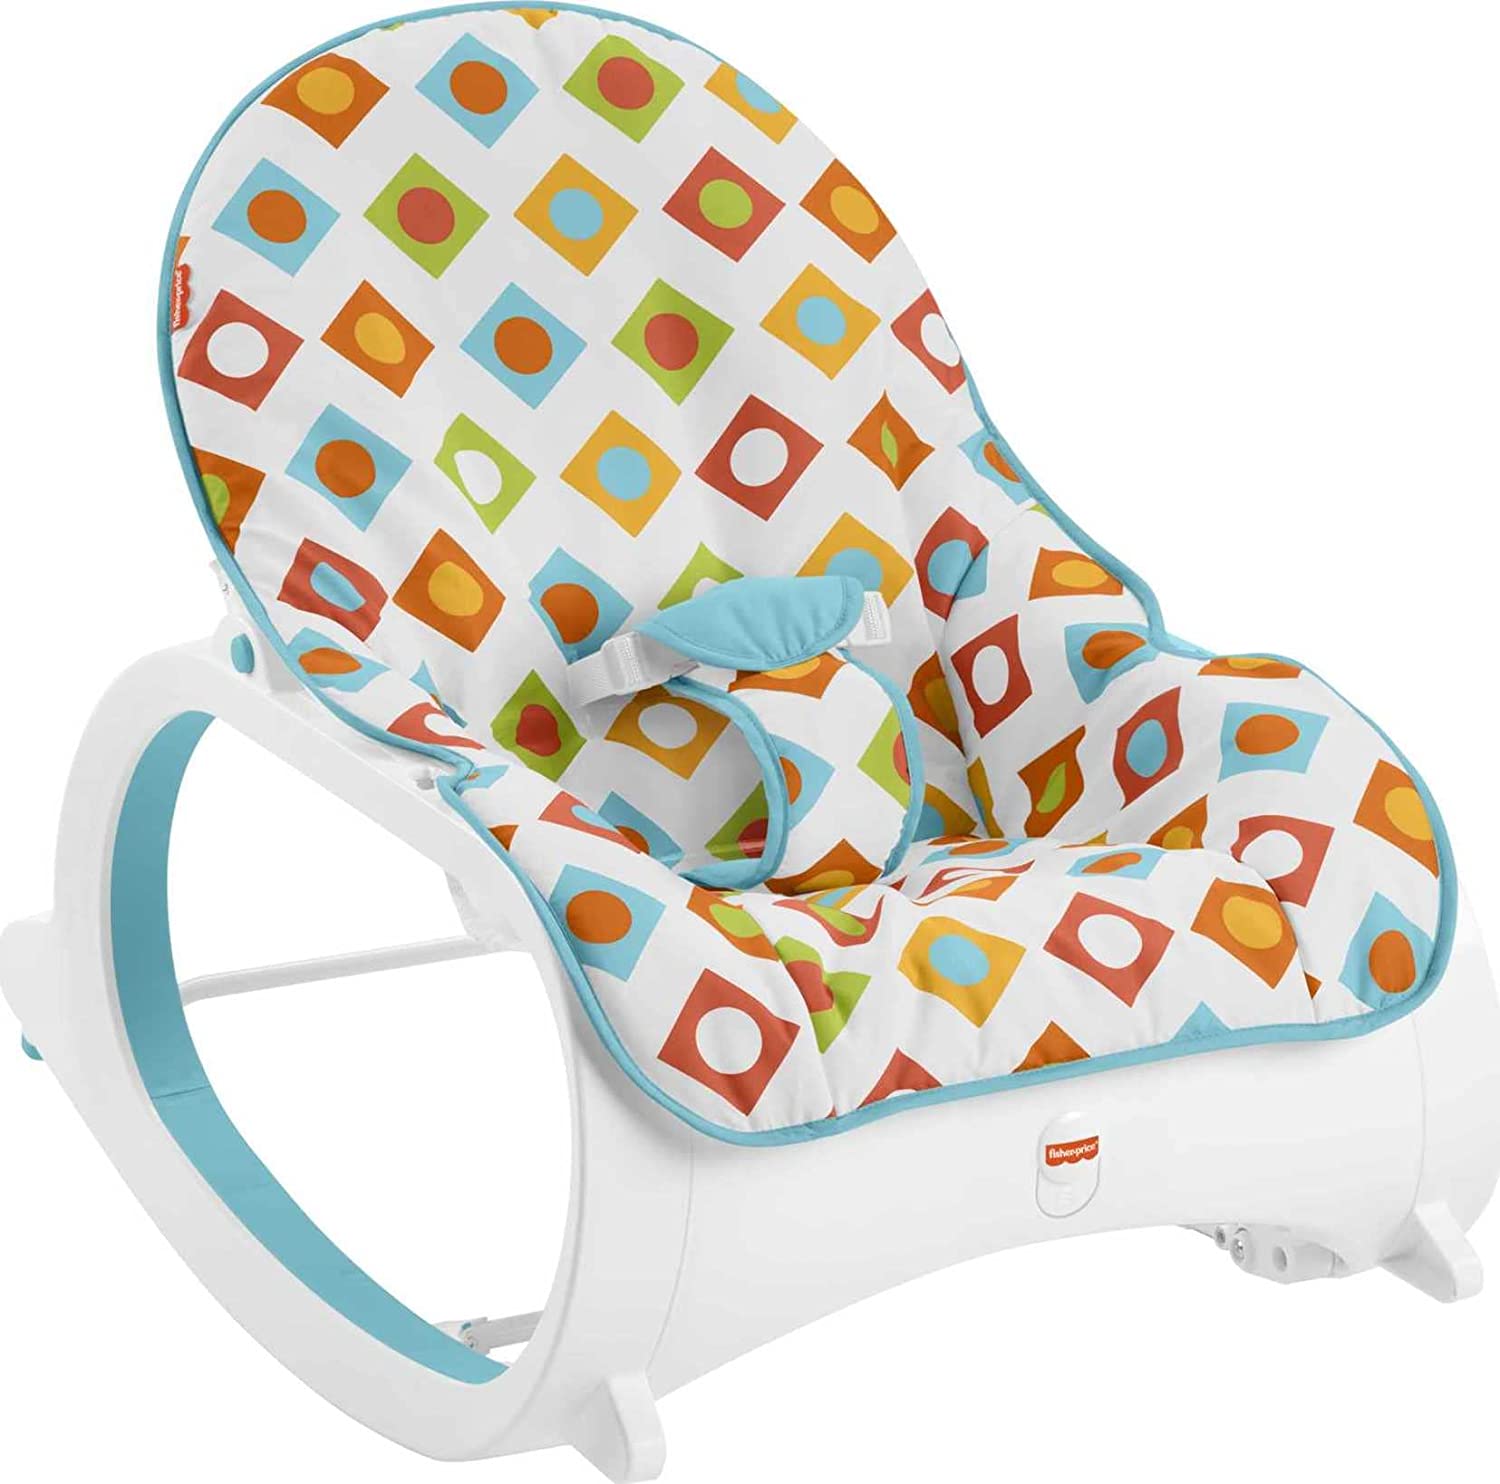  3. Pacific Pebble, Infant to Toddler Chair 